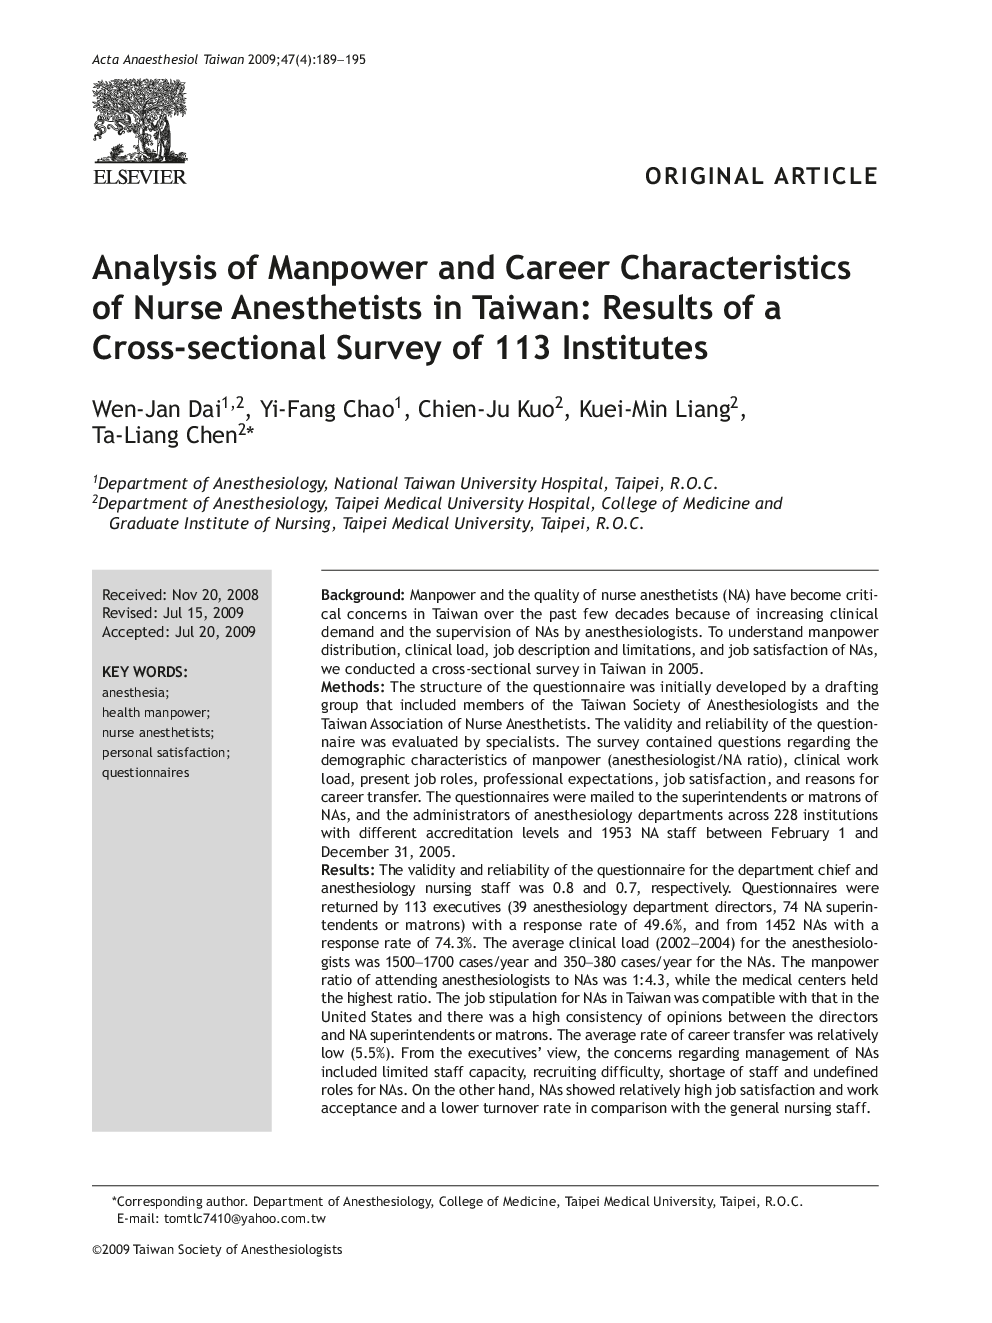 Analysis of Manpower and Career Characteristics of Nurse Anesthetists in Taiwan: Results of a Cross-sectional Survey of 113 Institutes